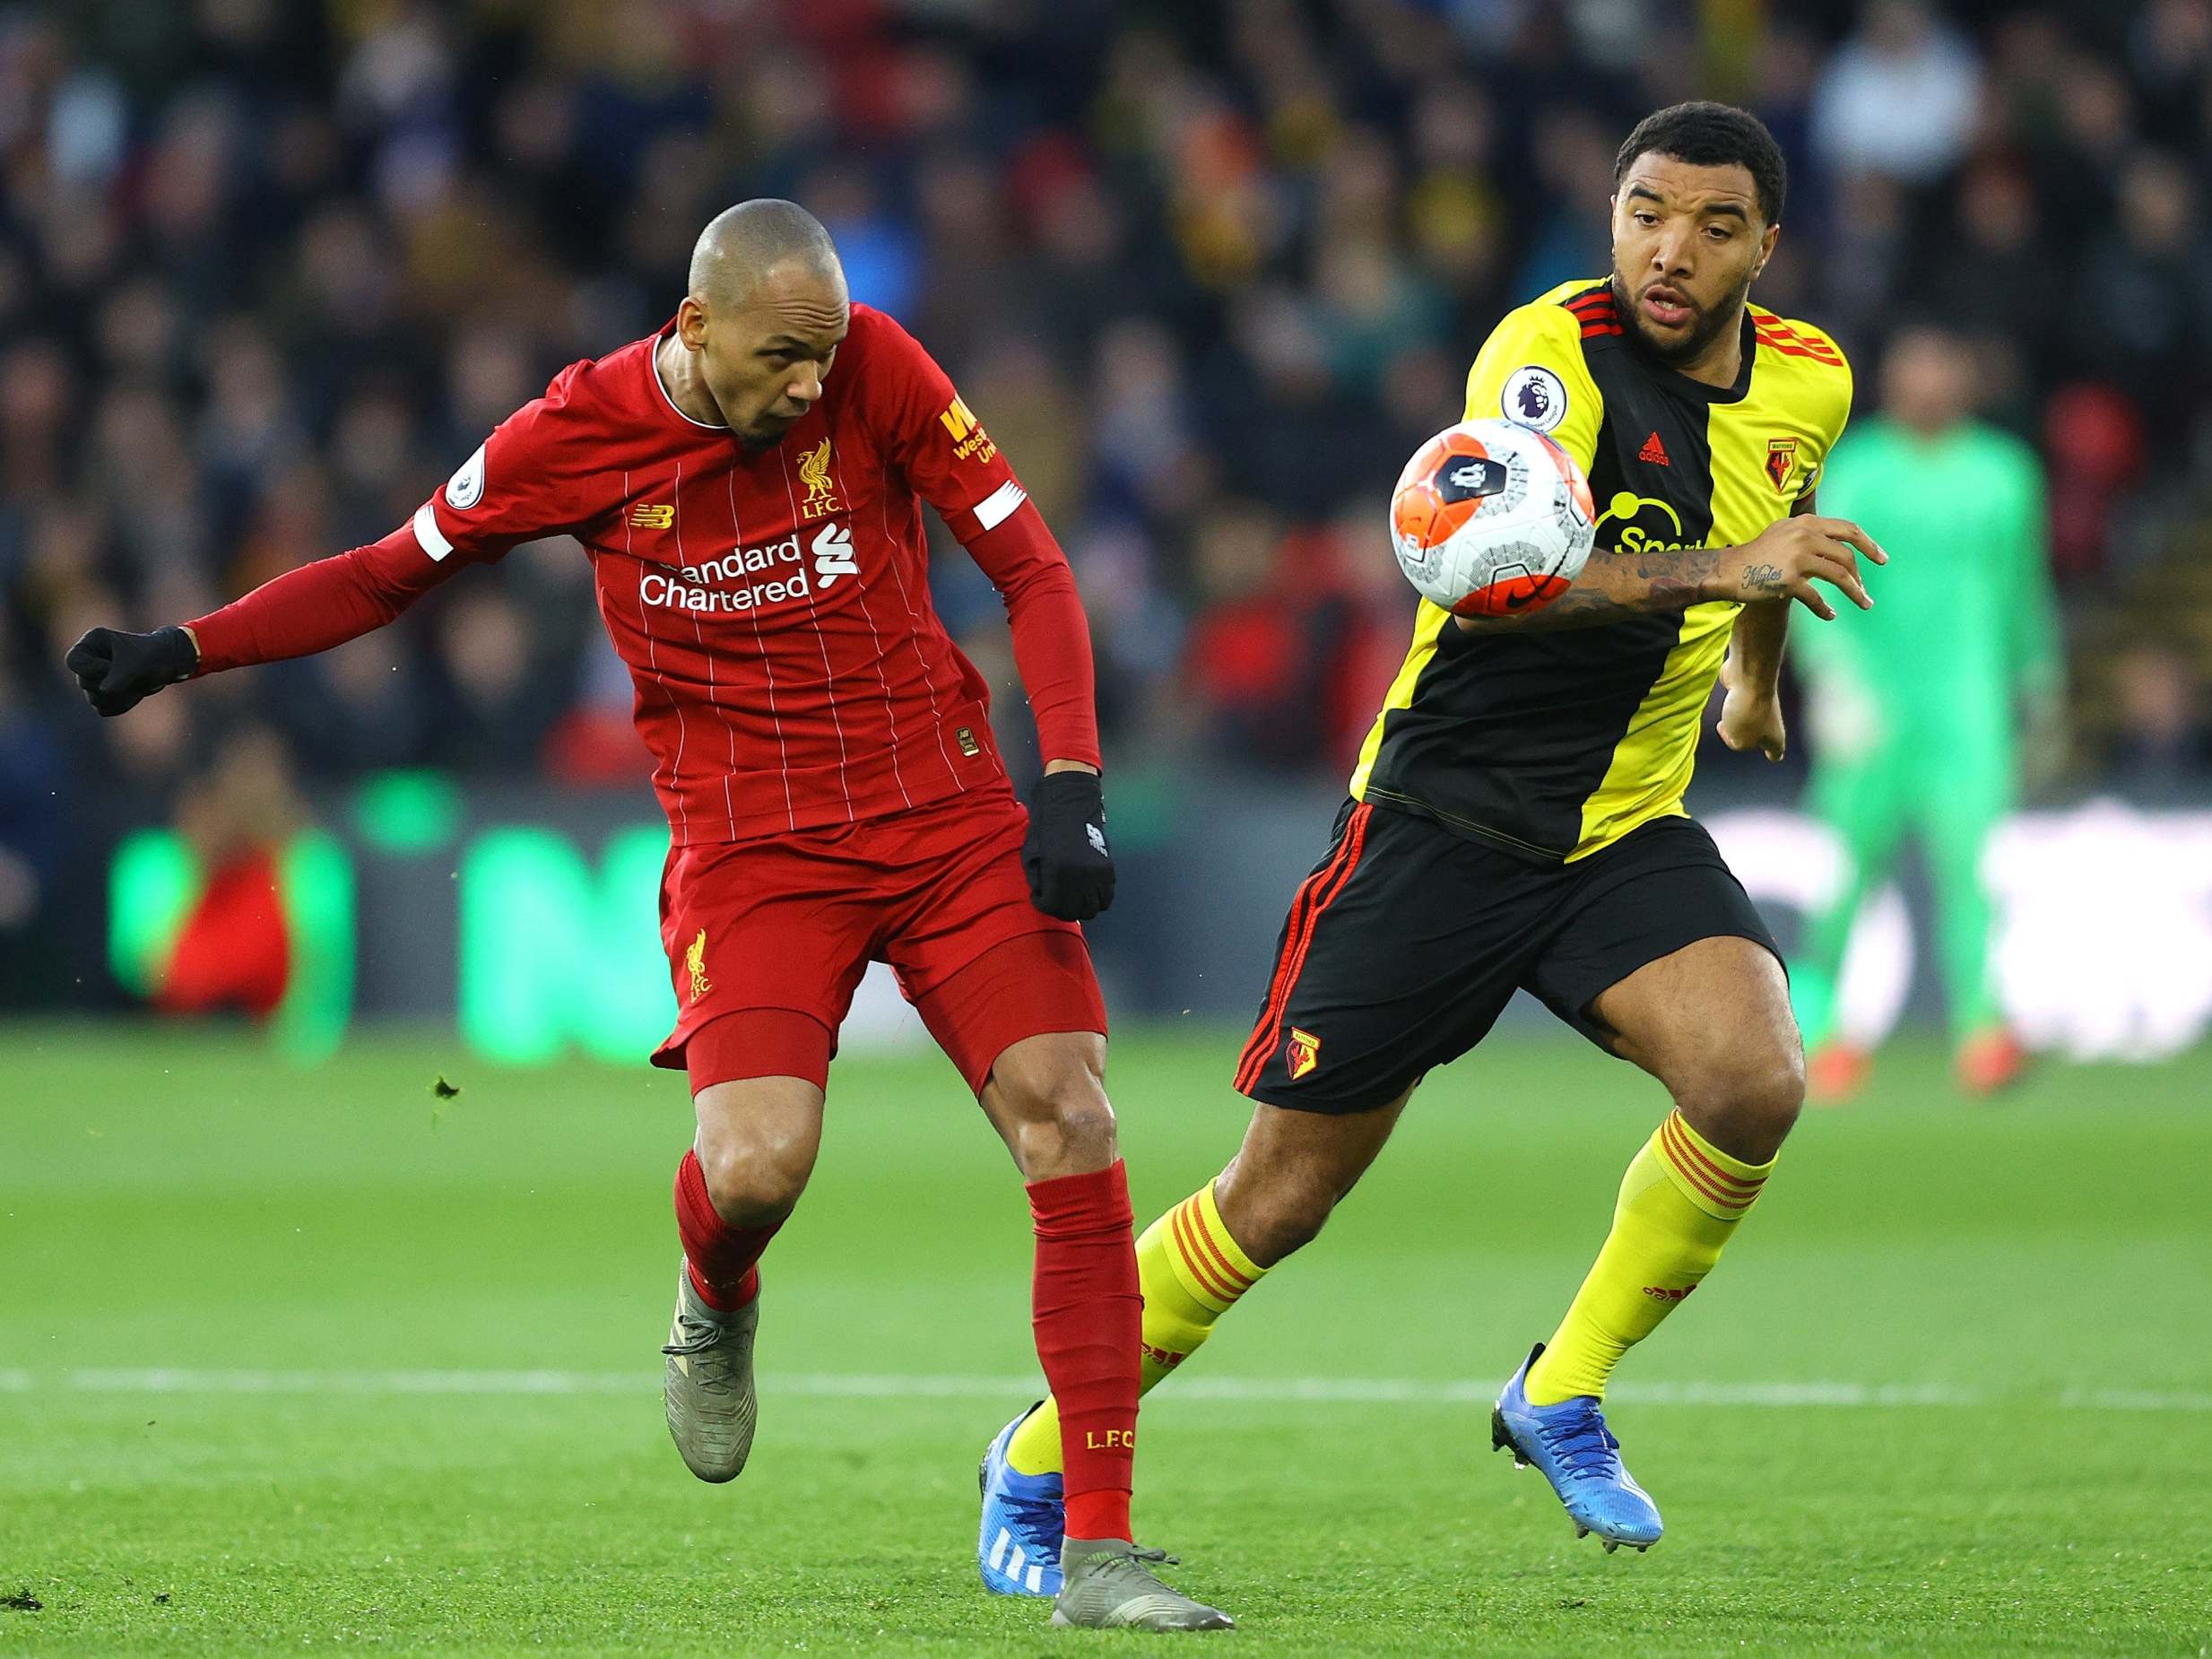 Watford vs Liverpool LIVE: Latest score, goals and updates from Premier League fixture today